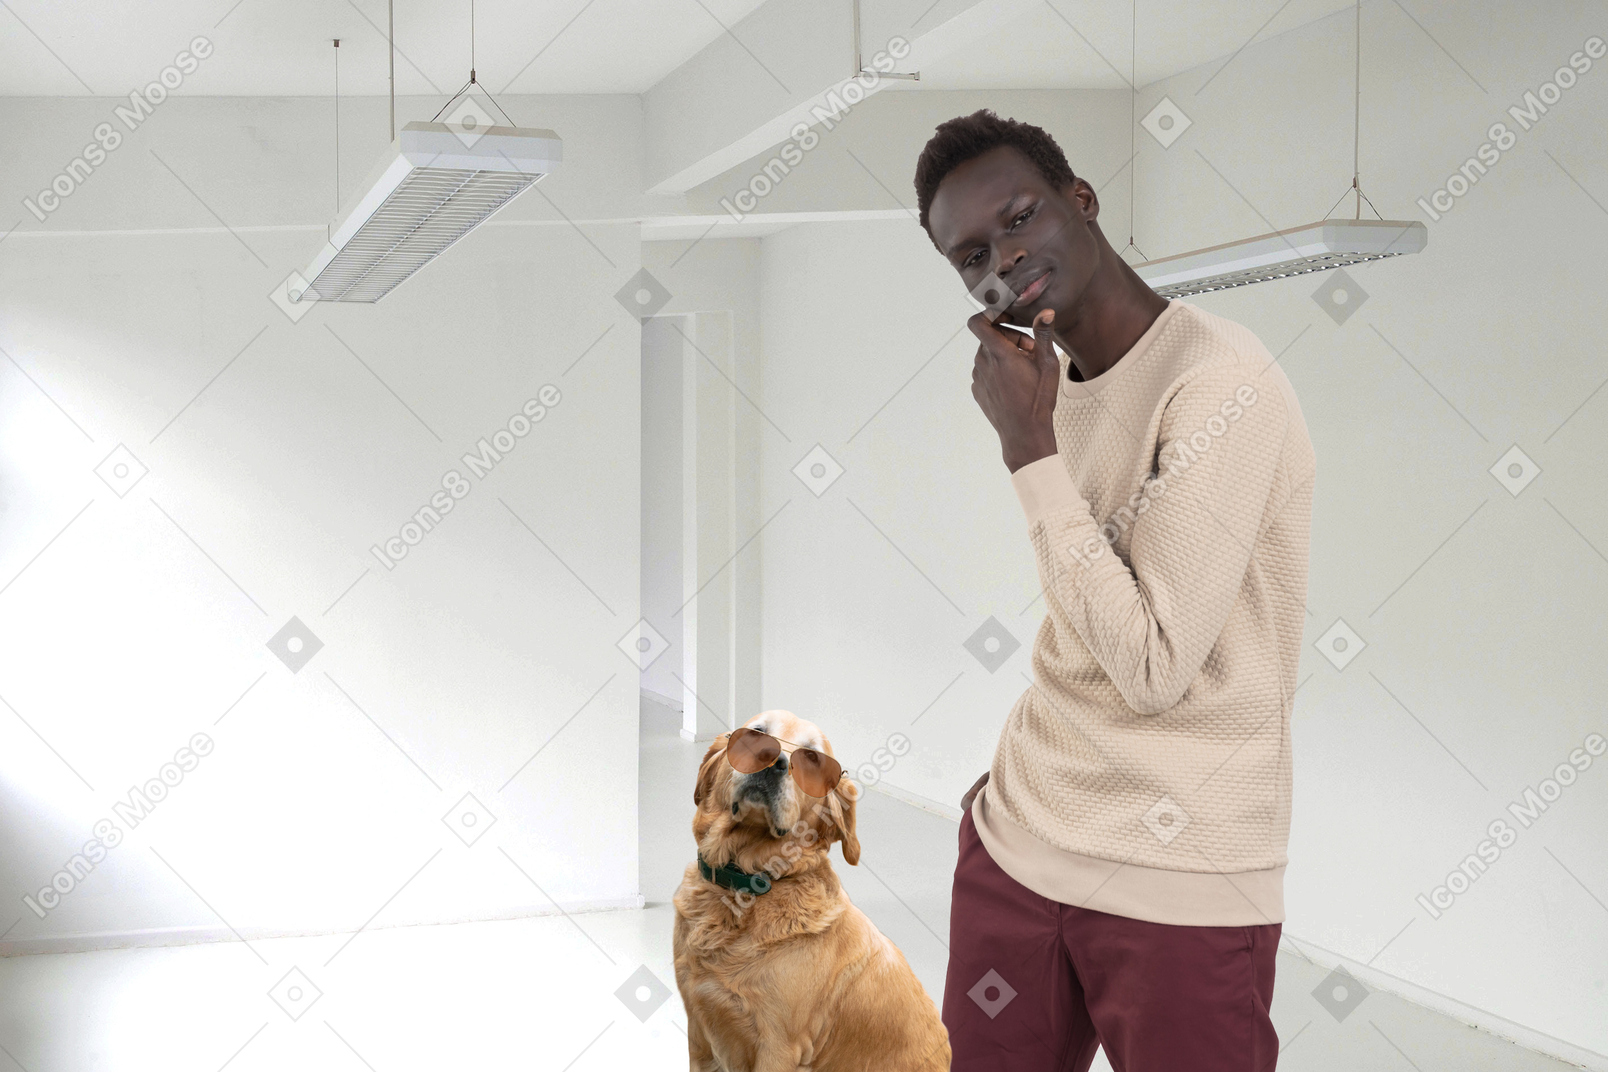 Pensive man standing next to a labrador in sunglasses